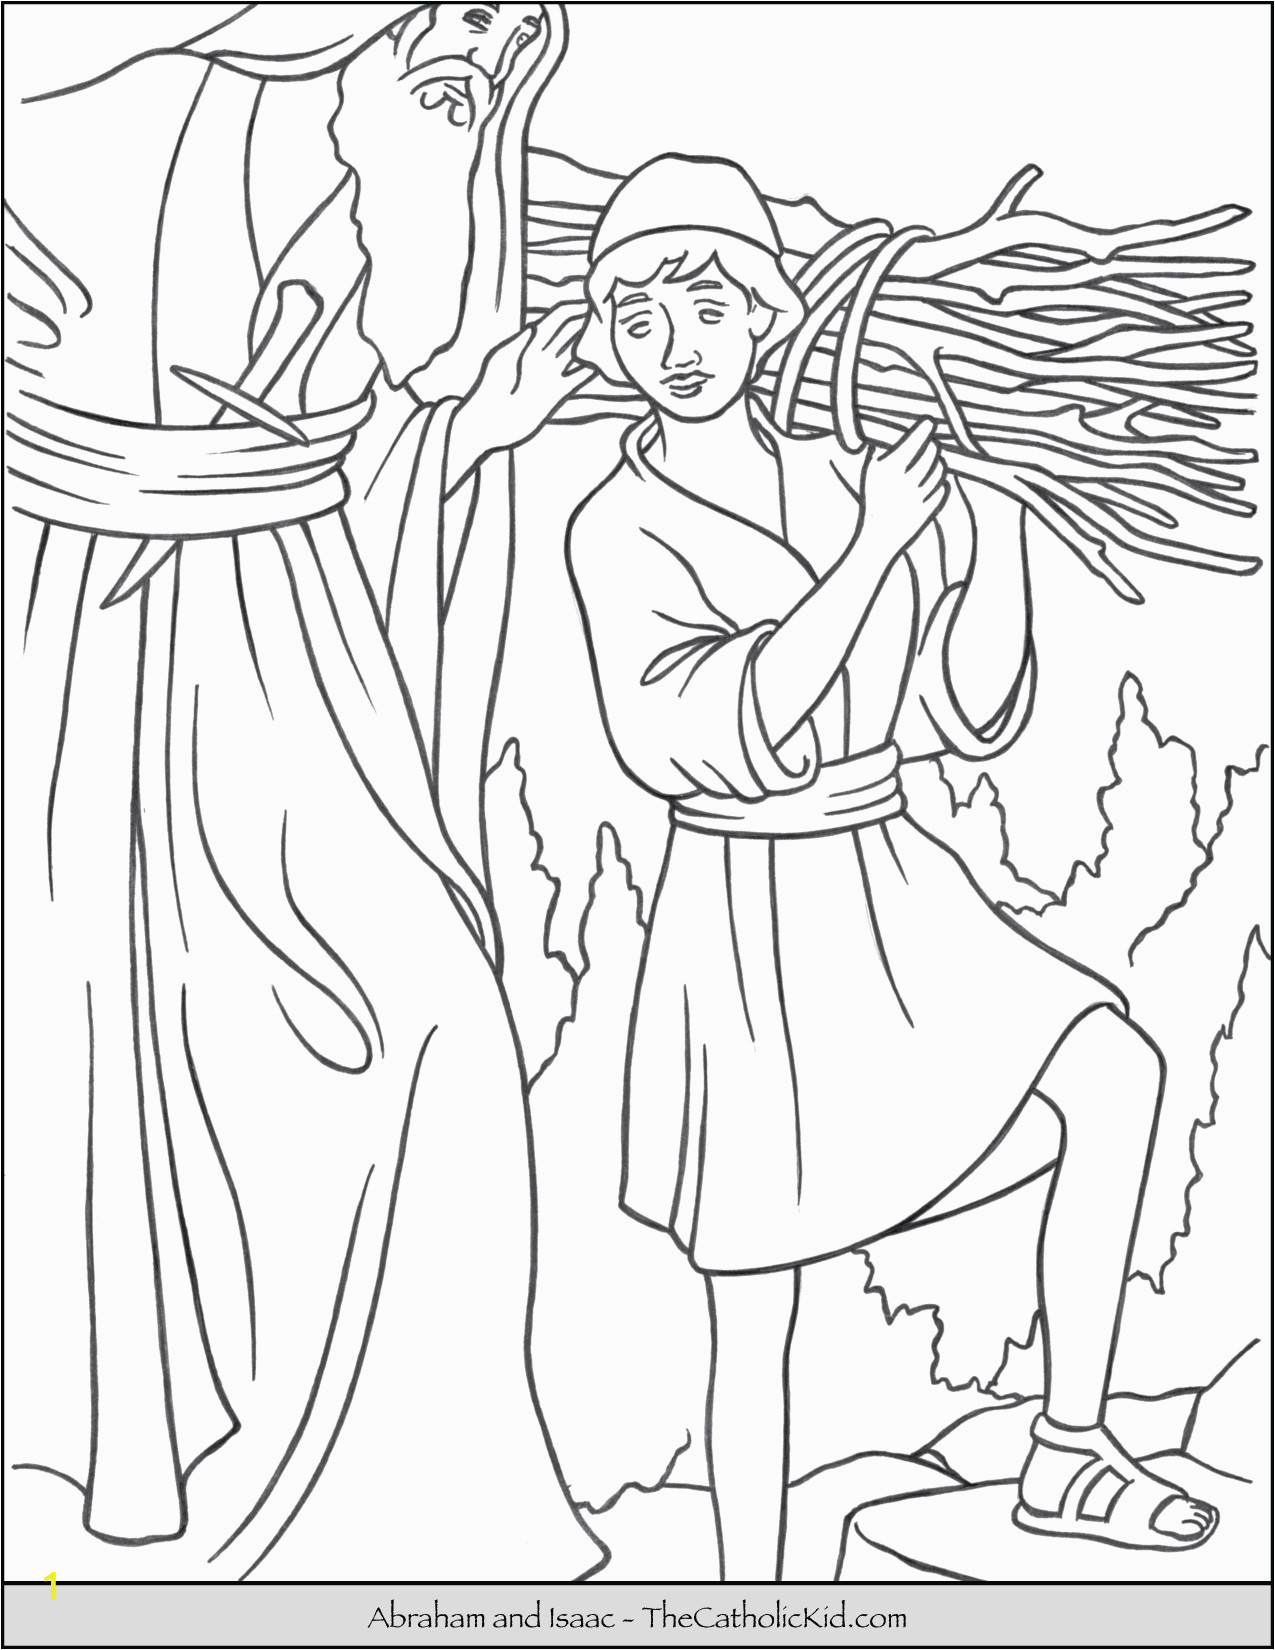 Abraham and isaac Coloring Pages Free Abraham and isaac Coloring Page ...